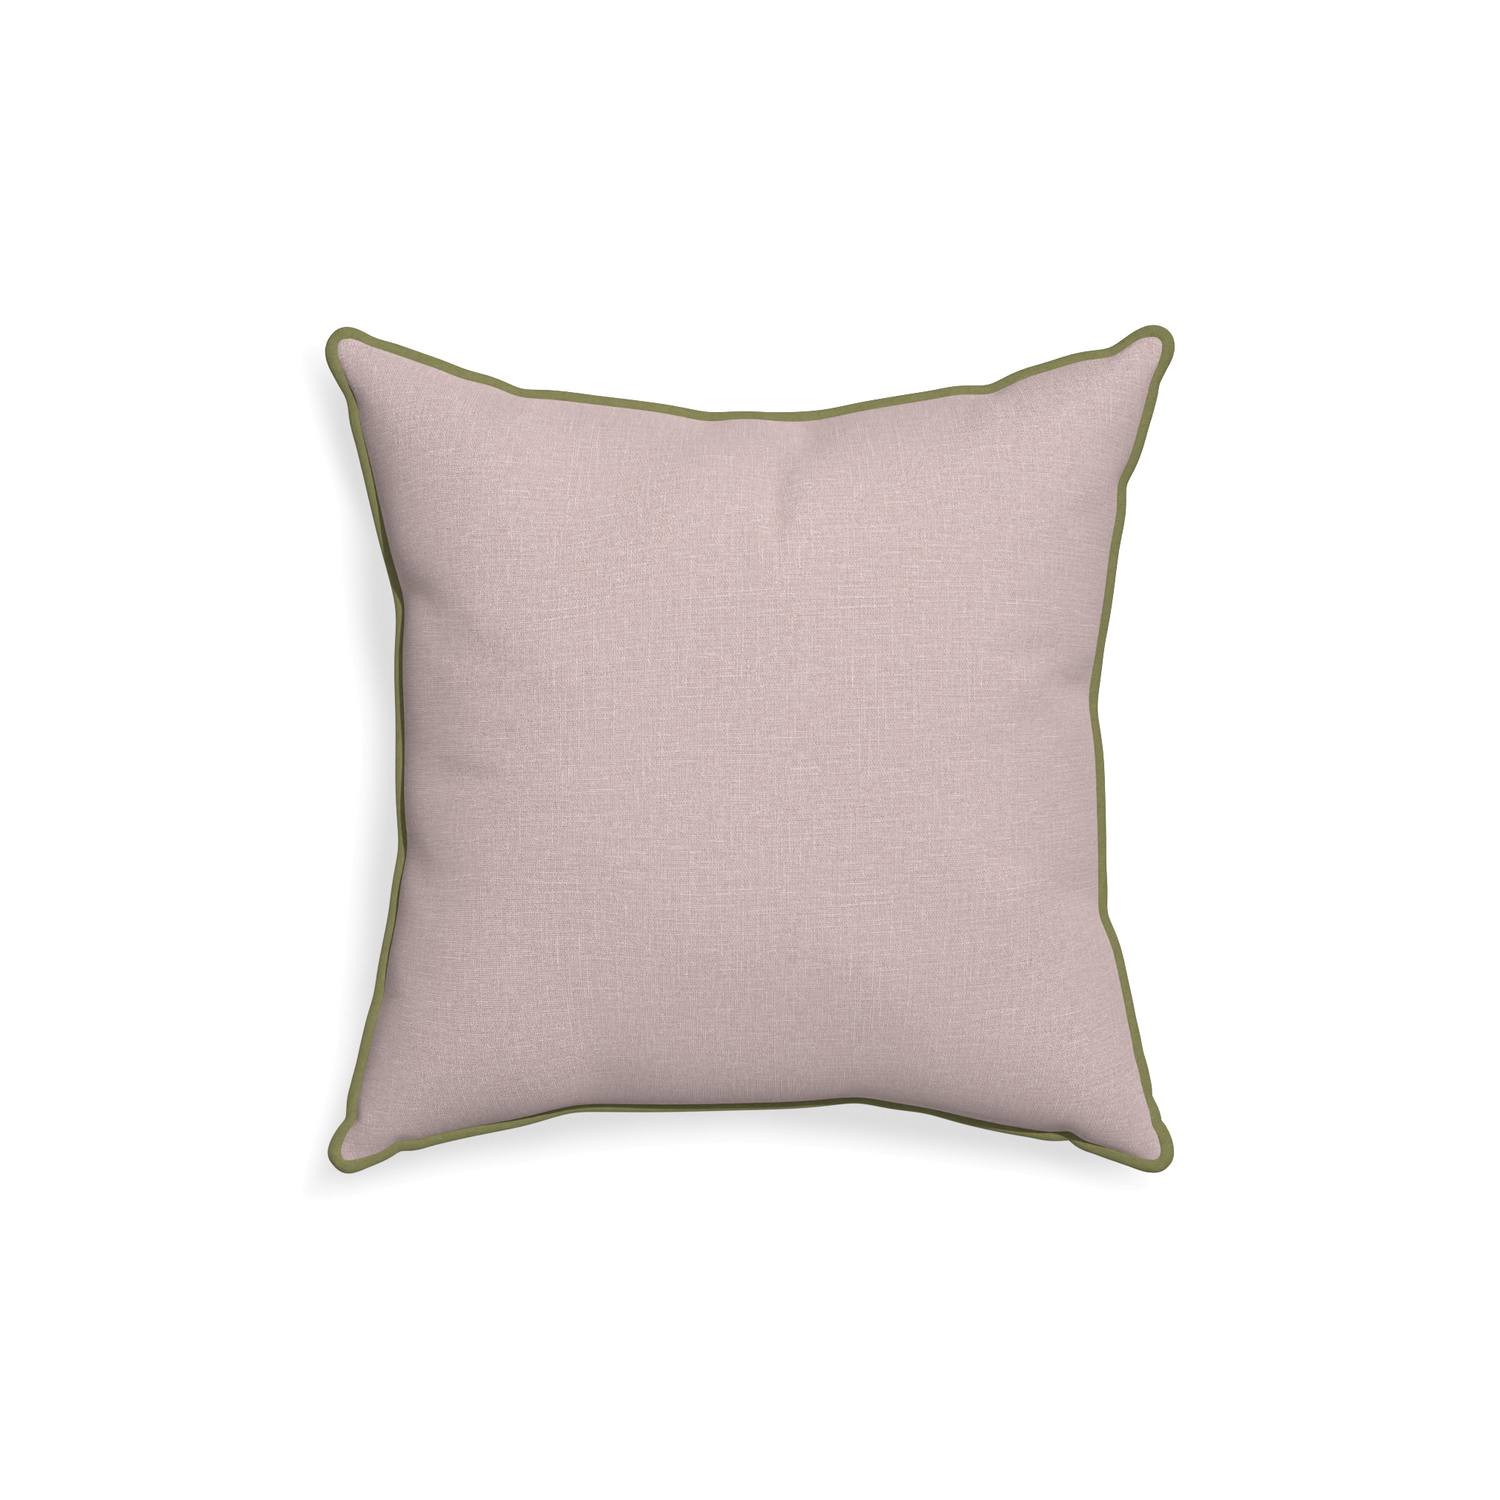 20-square orchid custom mauve pinkpillow with moss piping on white background